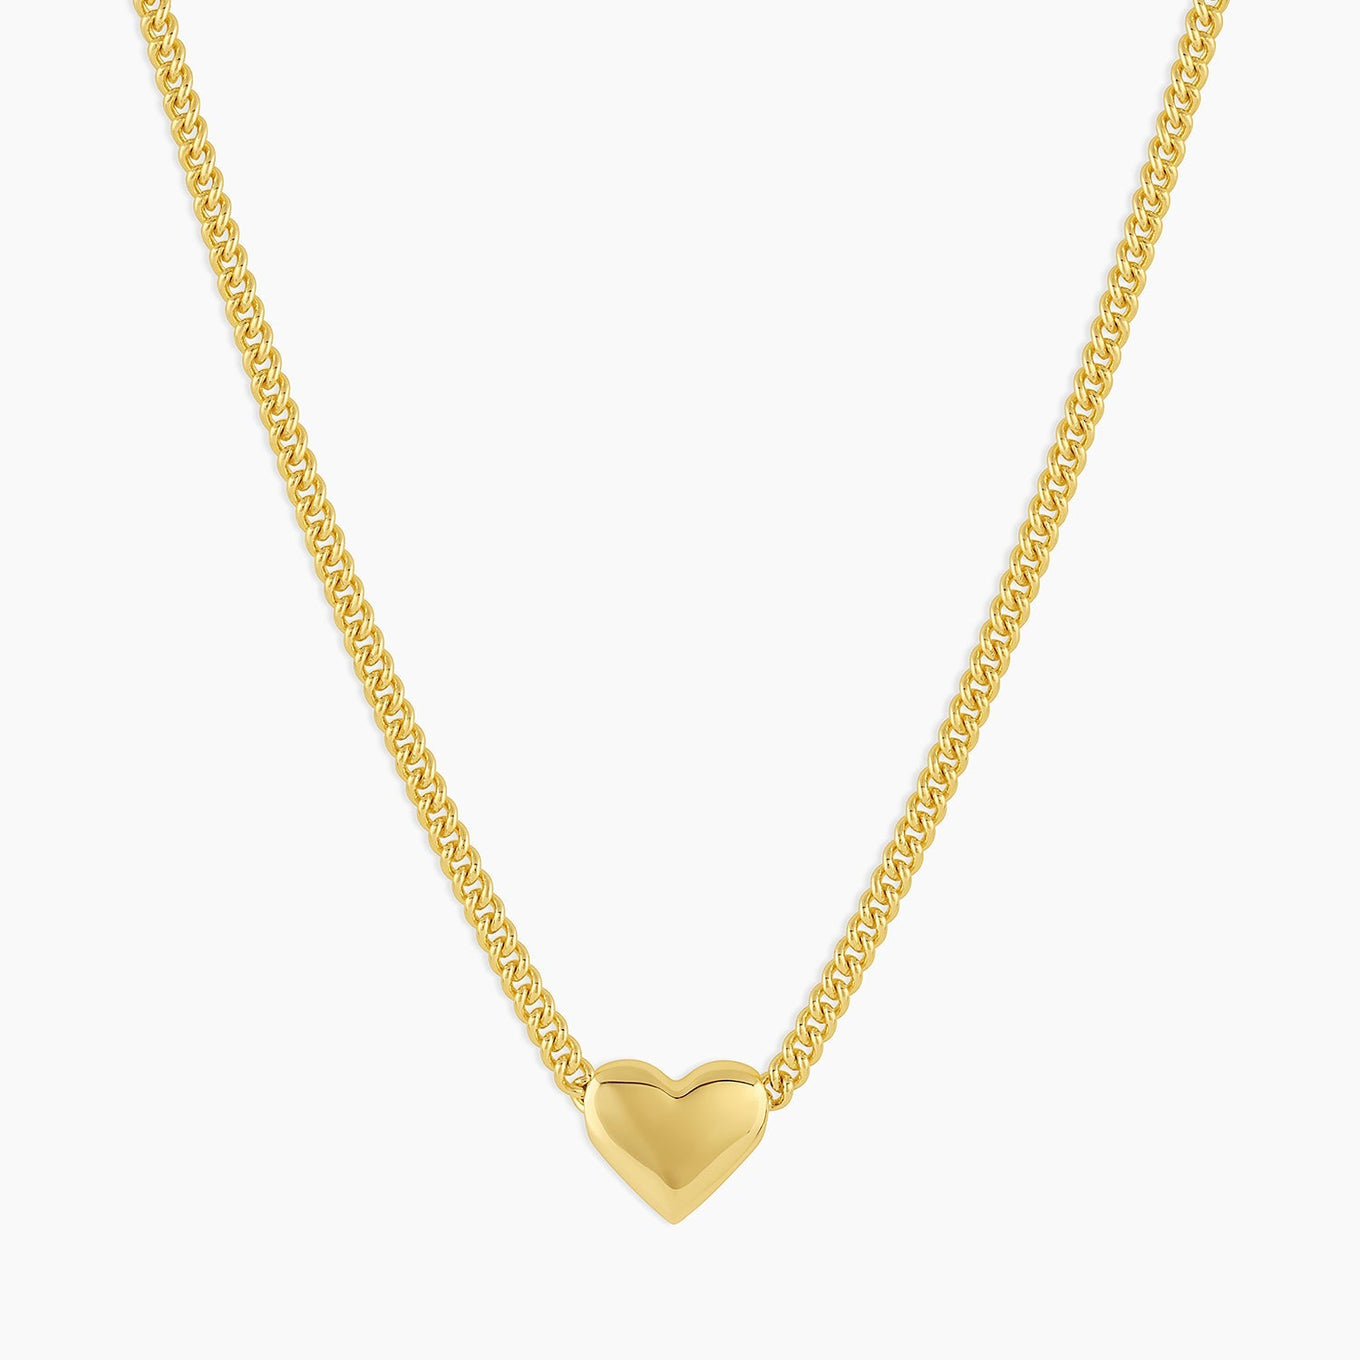 Lou Heart Charm Necklace, Gold